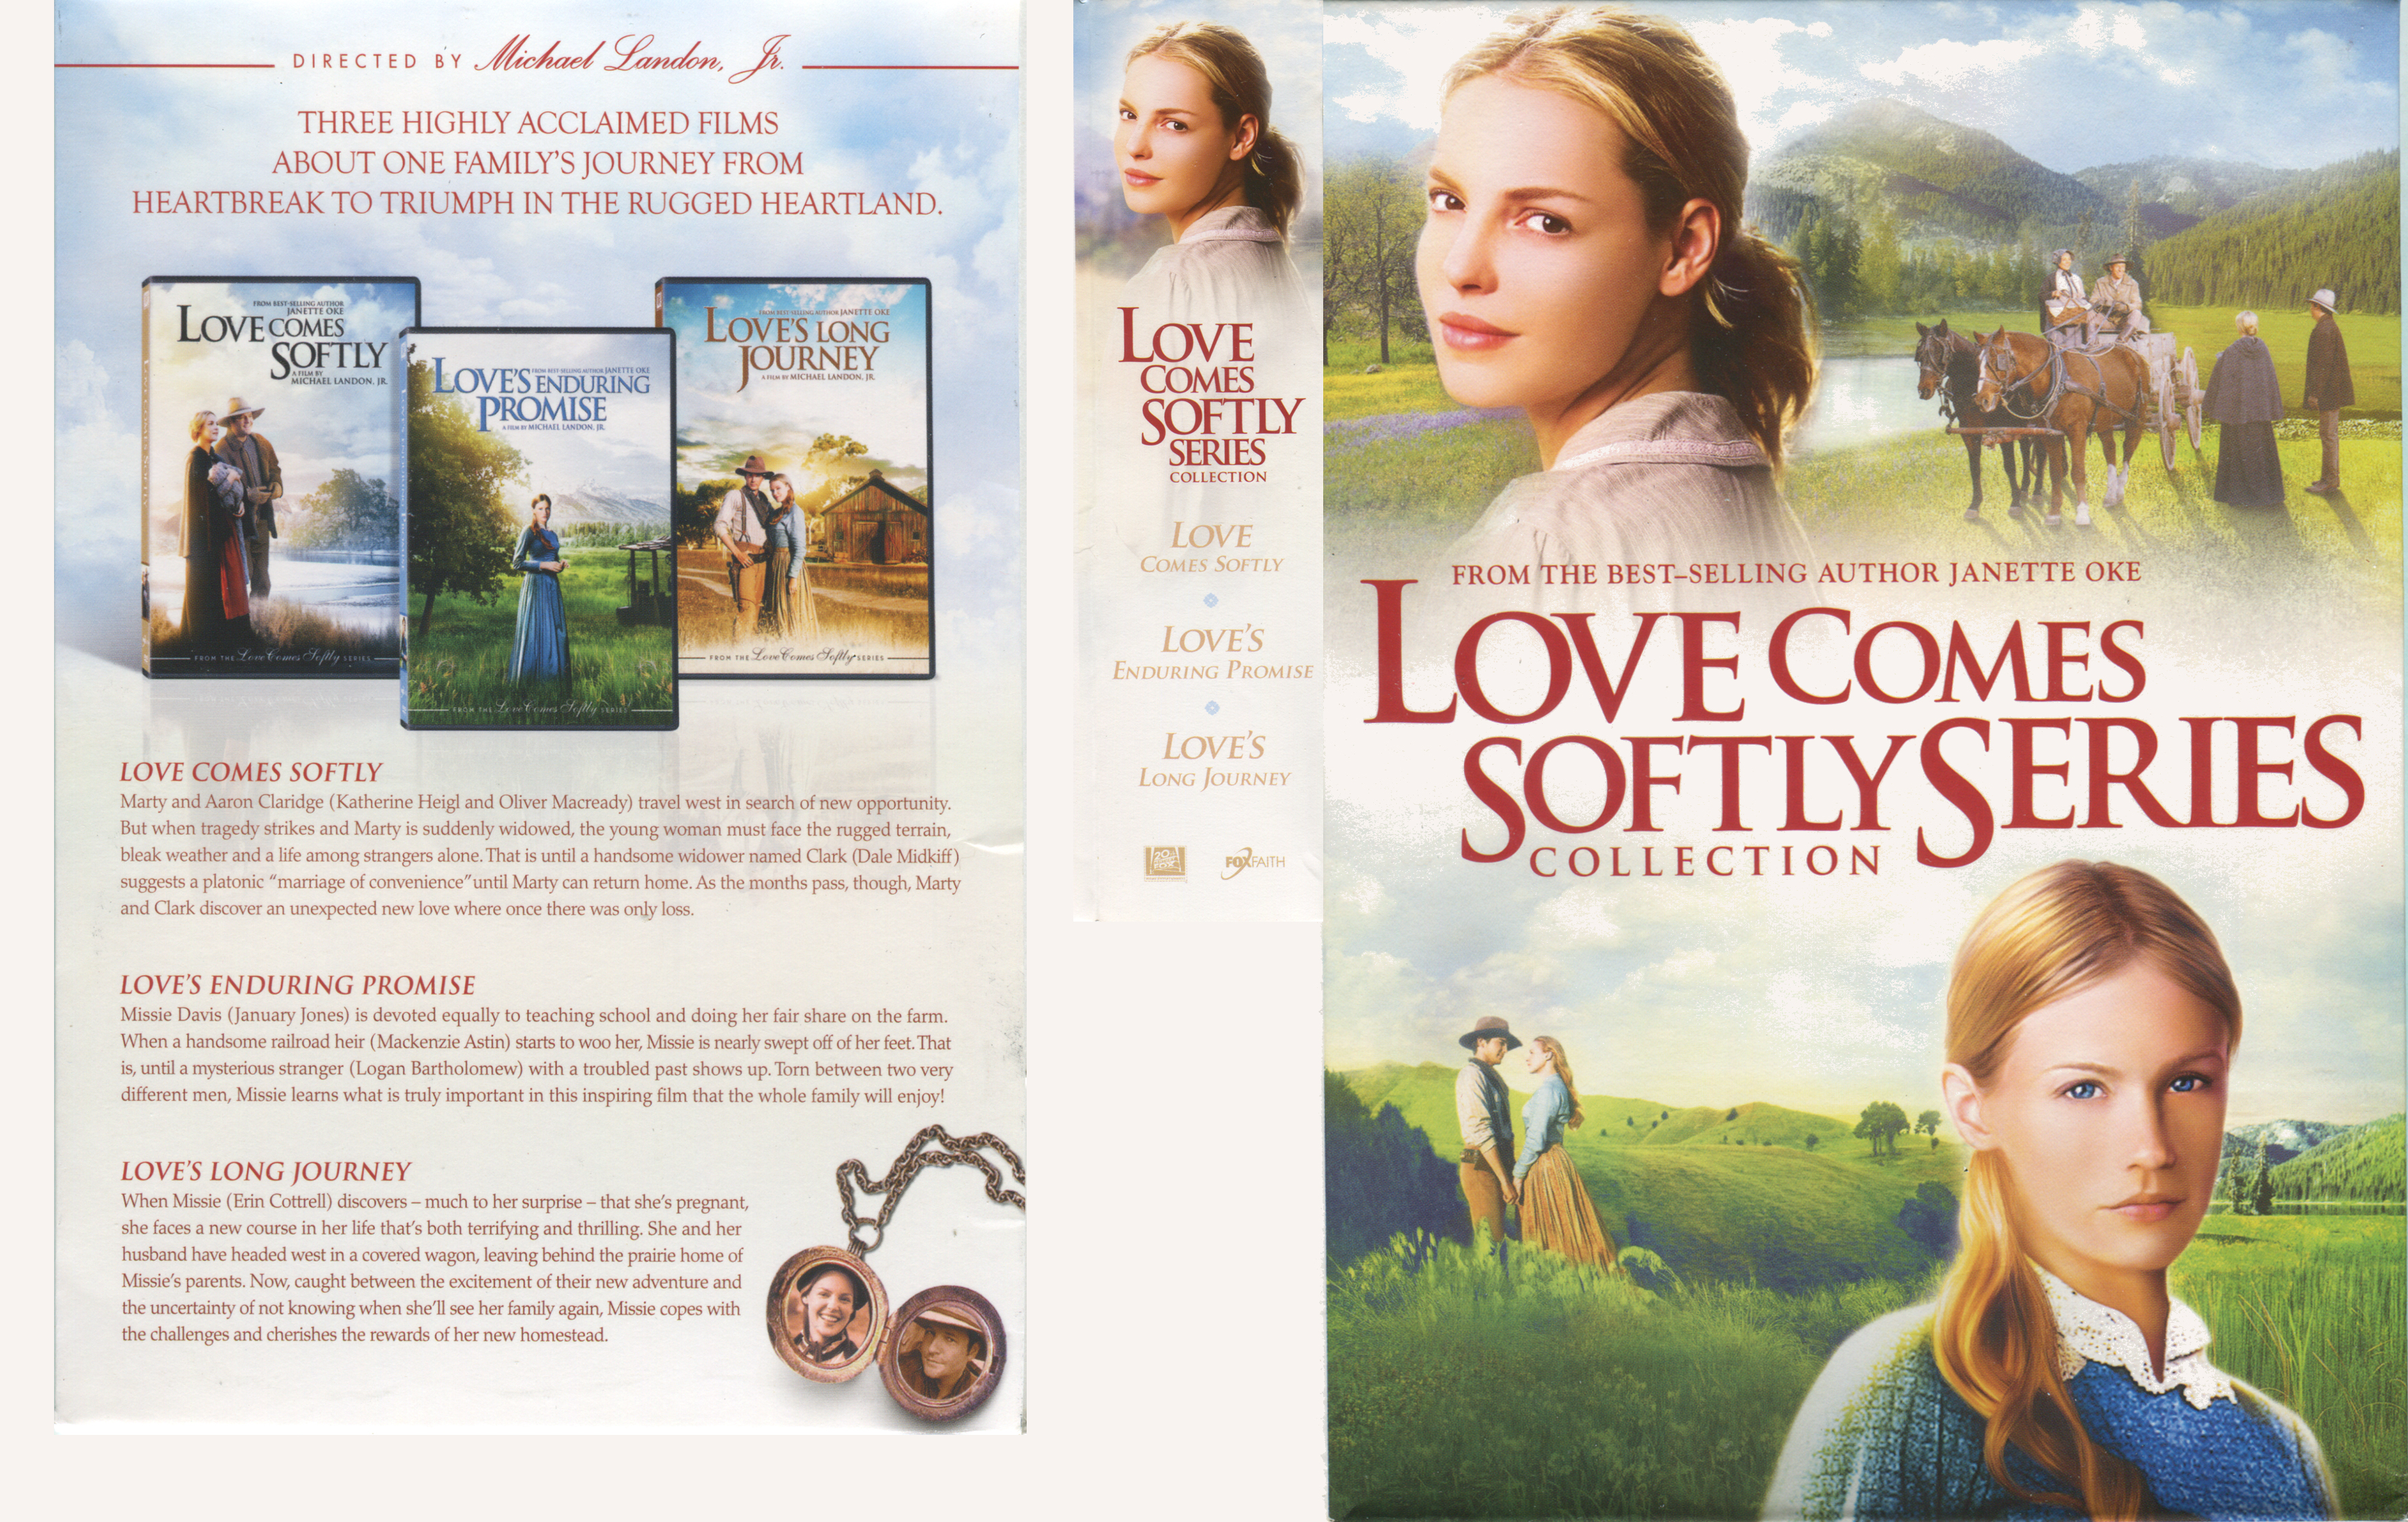 Love Comes Softly Series Collection 2012 R1 DVD Cover.jpg.